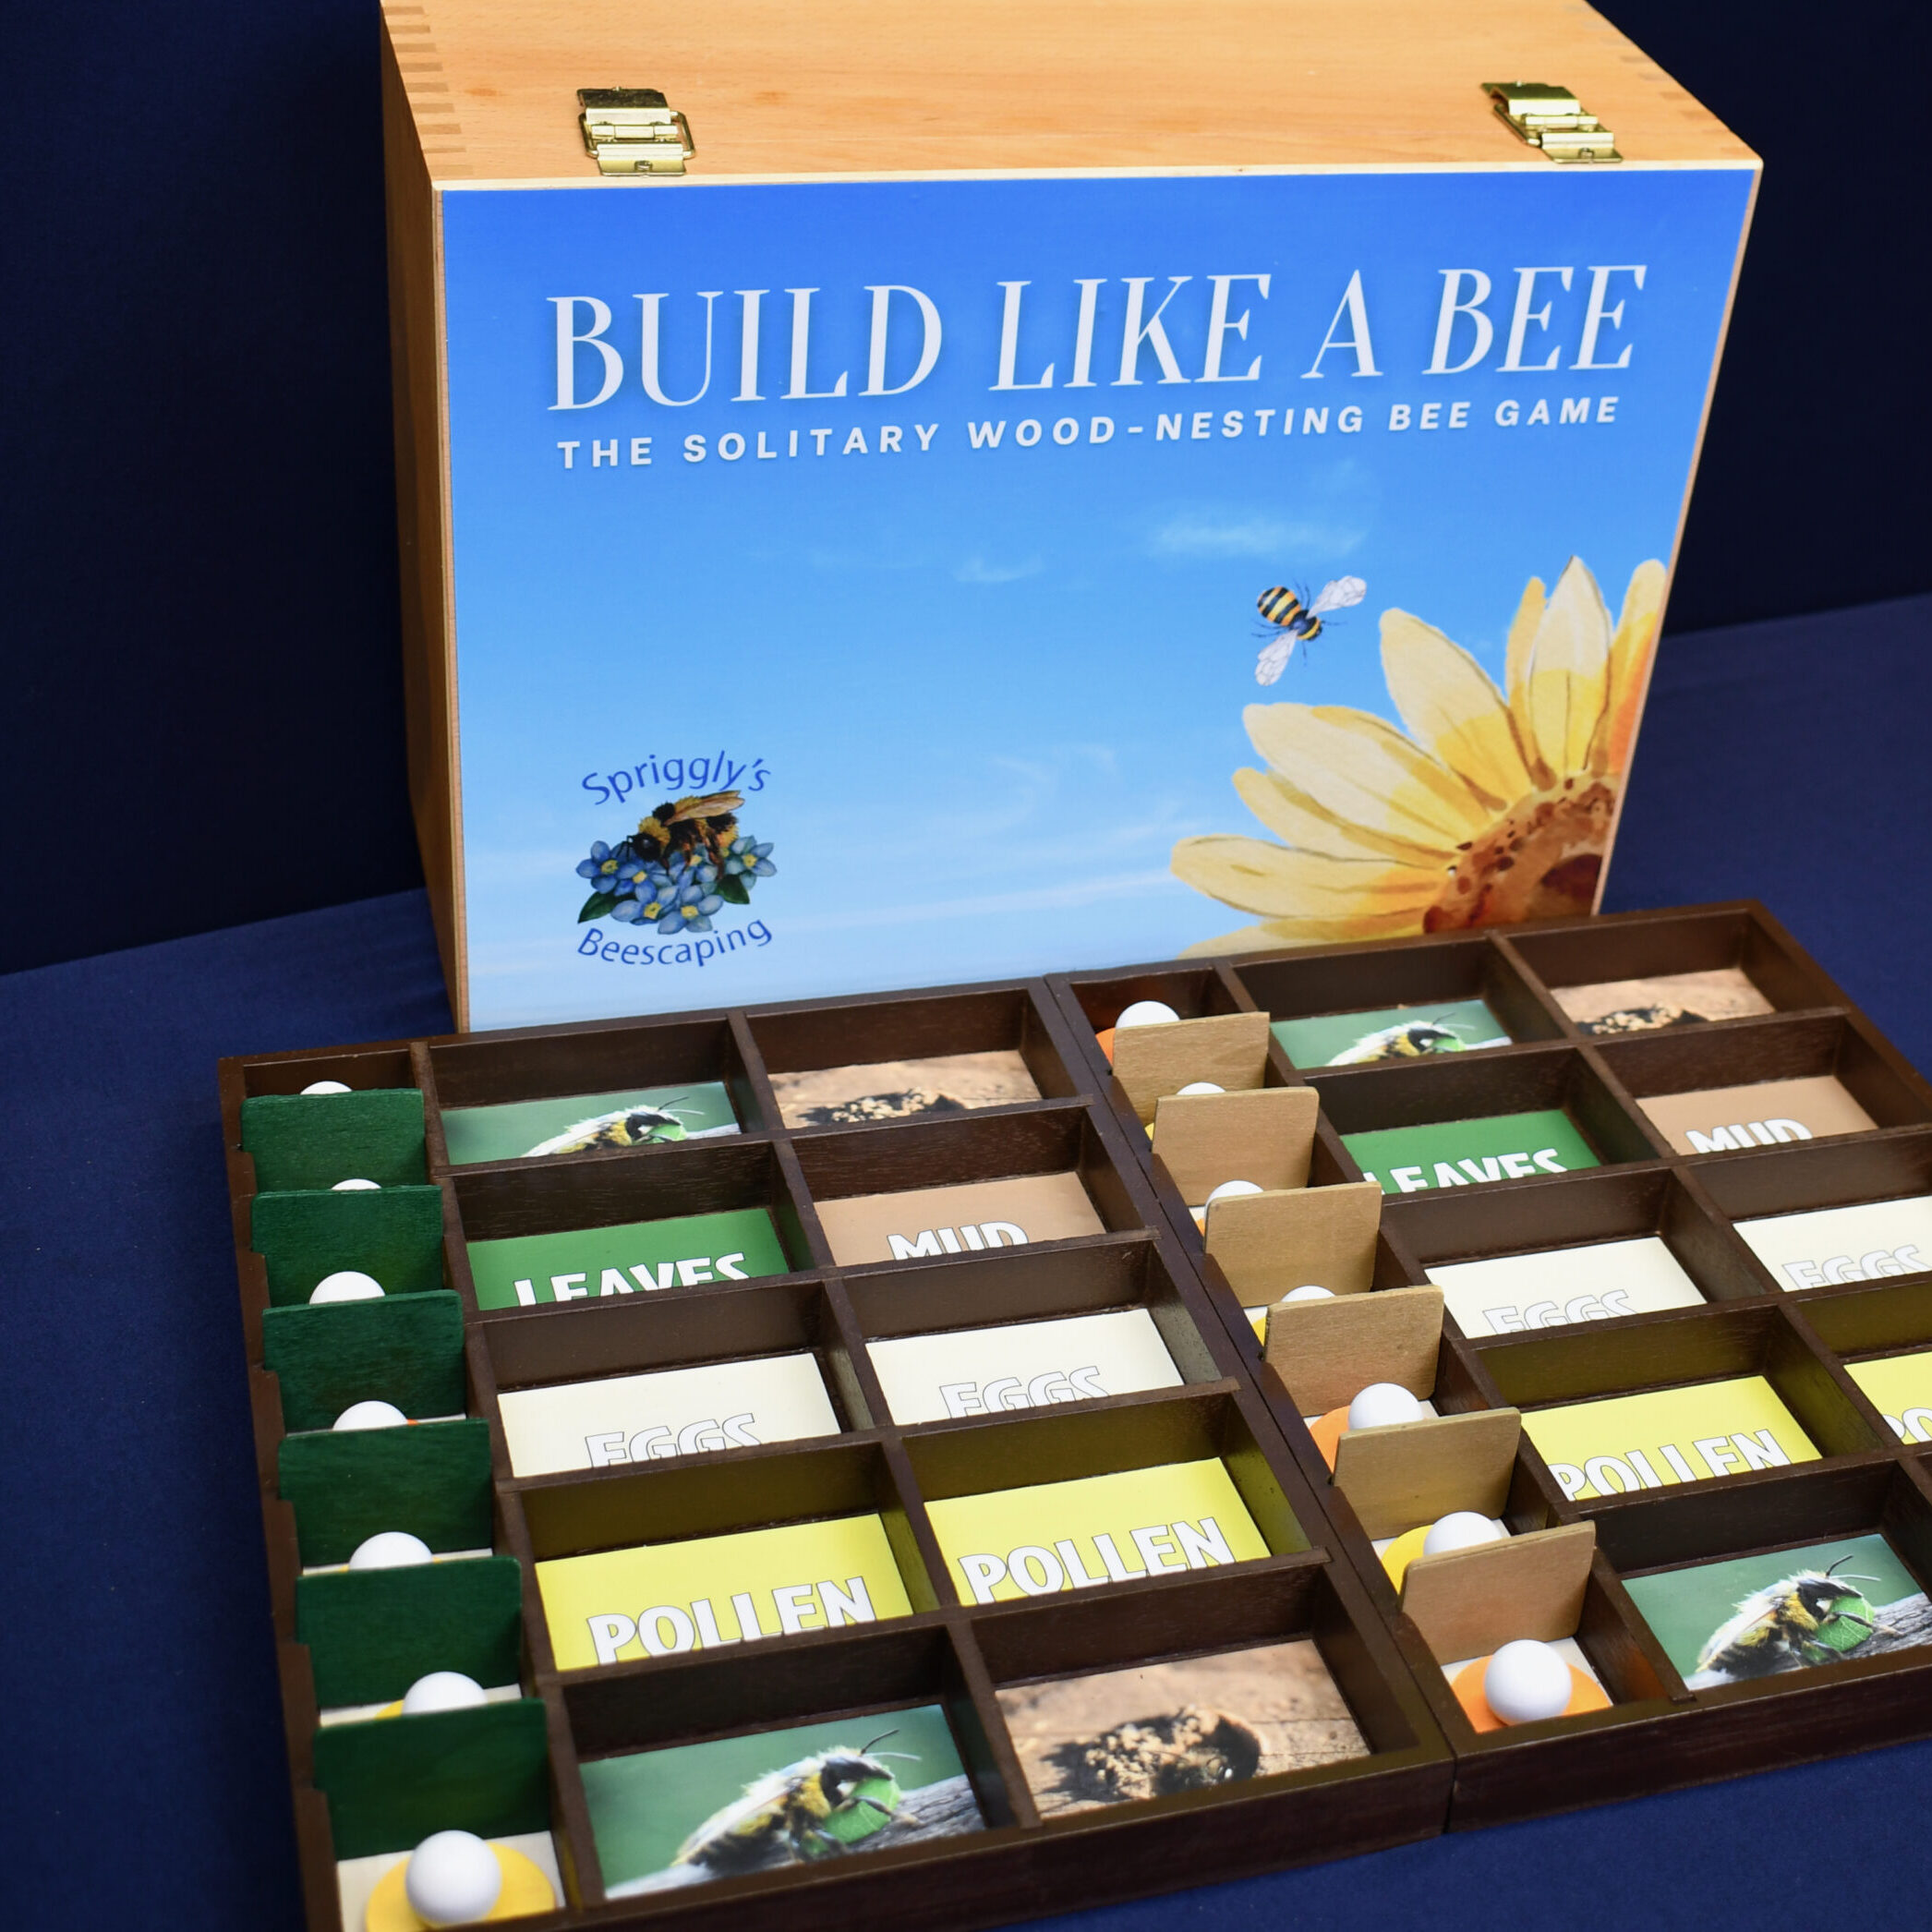 Build like a Bee - original game by Spriggly's Beescaping